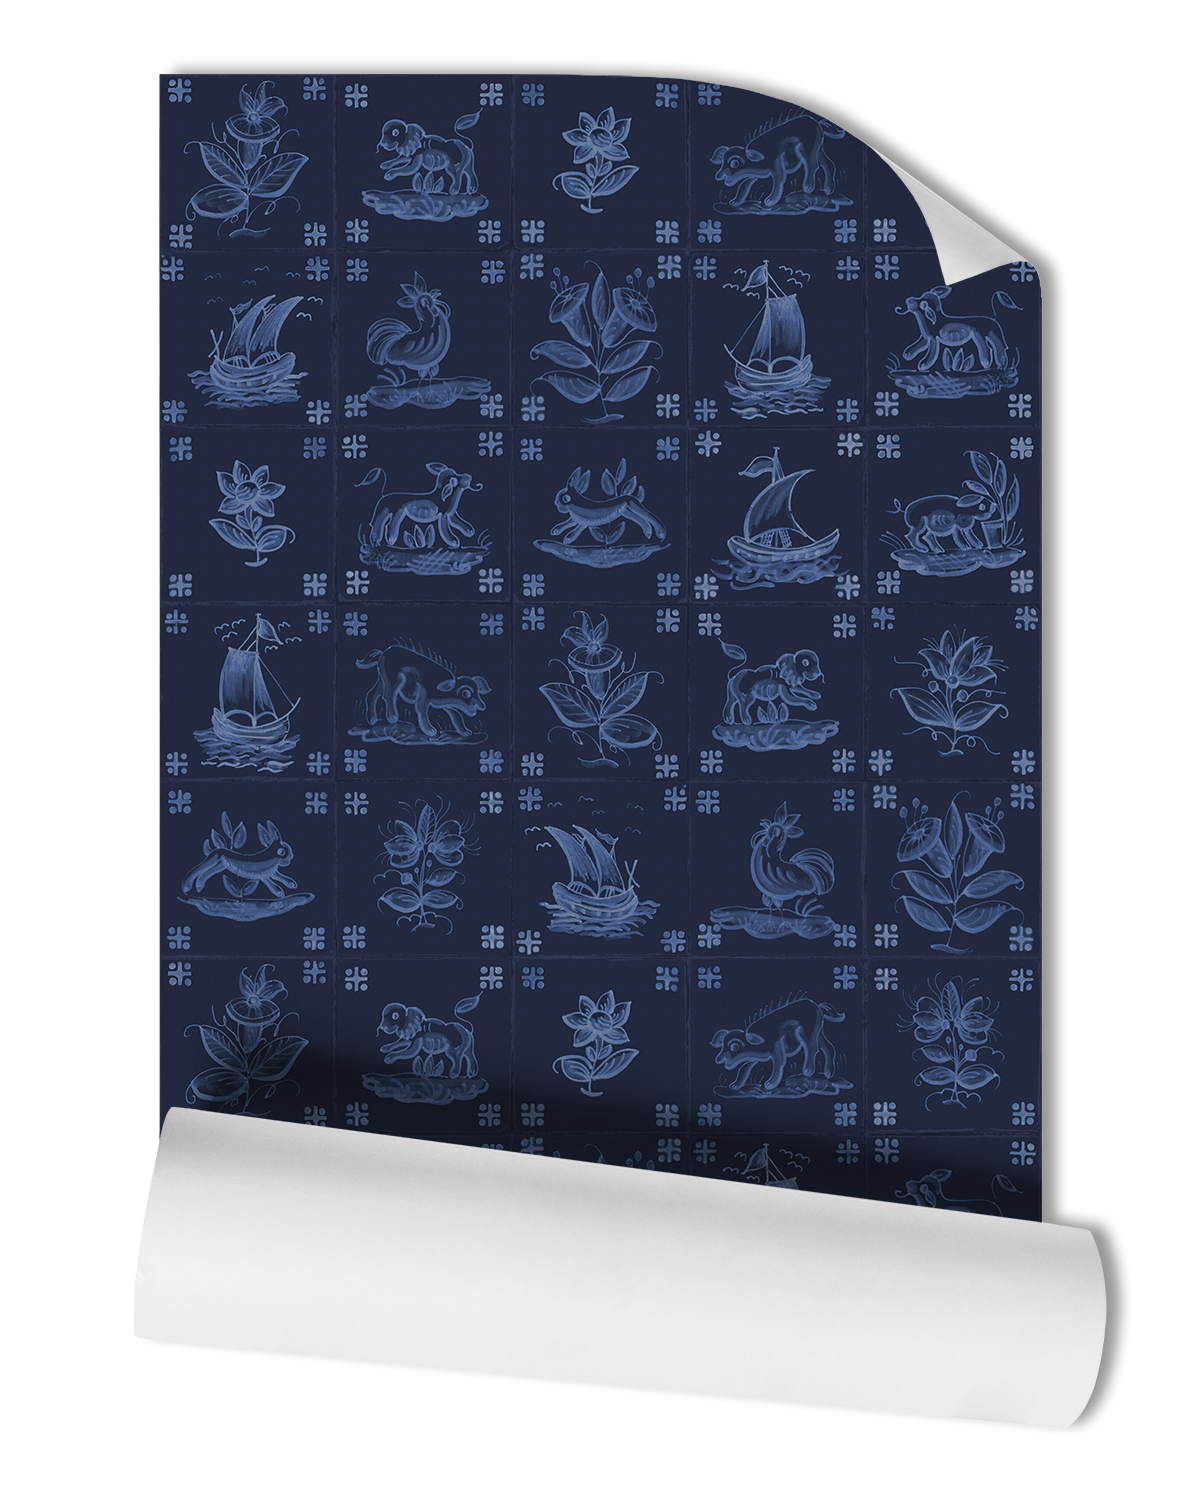 Enhance your space with the elegance of our Antique Delft Wallpaper in Indigo. Featuring deep navy blue tiles adorned with light blue delft motifs, this wallpaper captures the essence of Portuguese tiles.